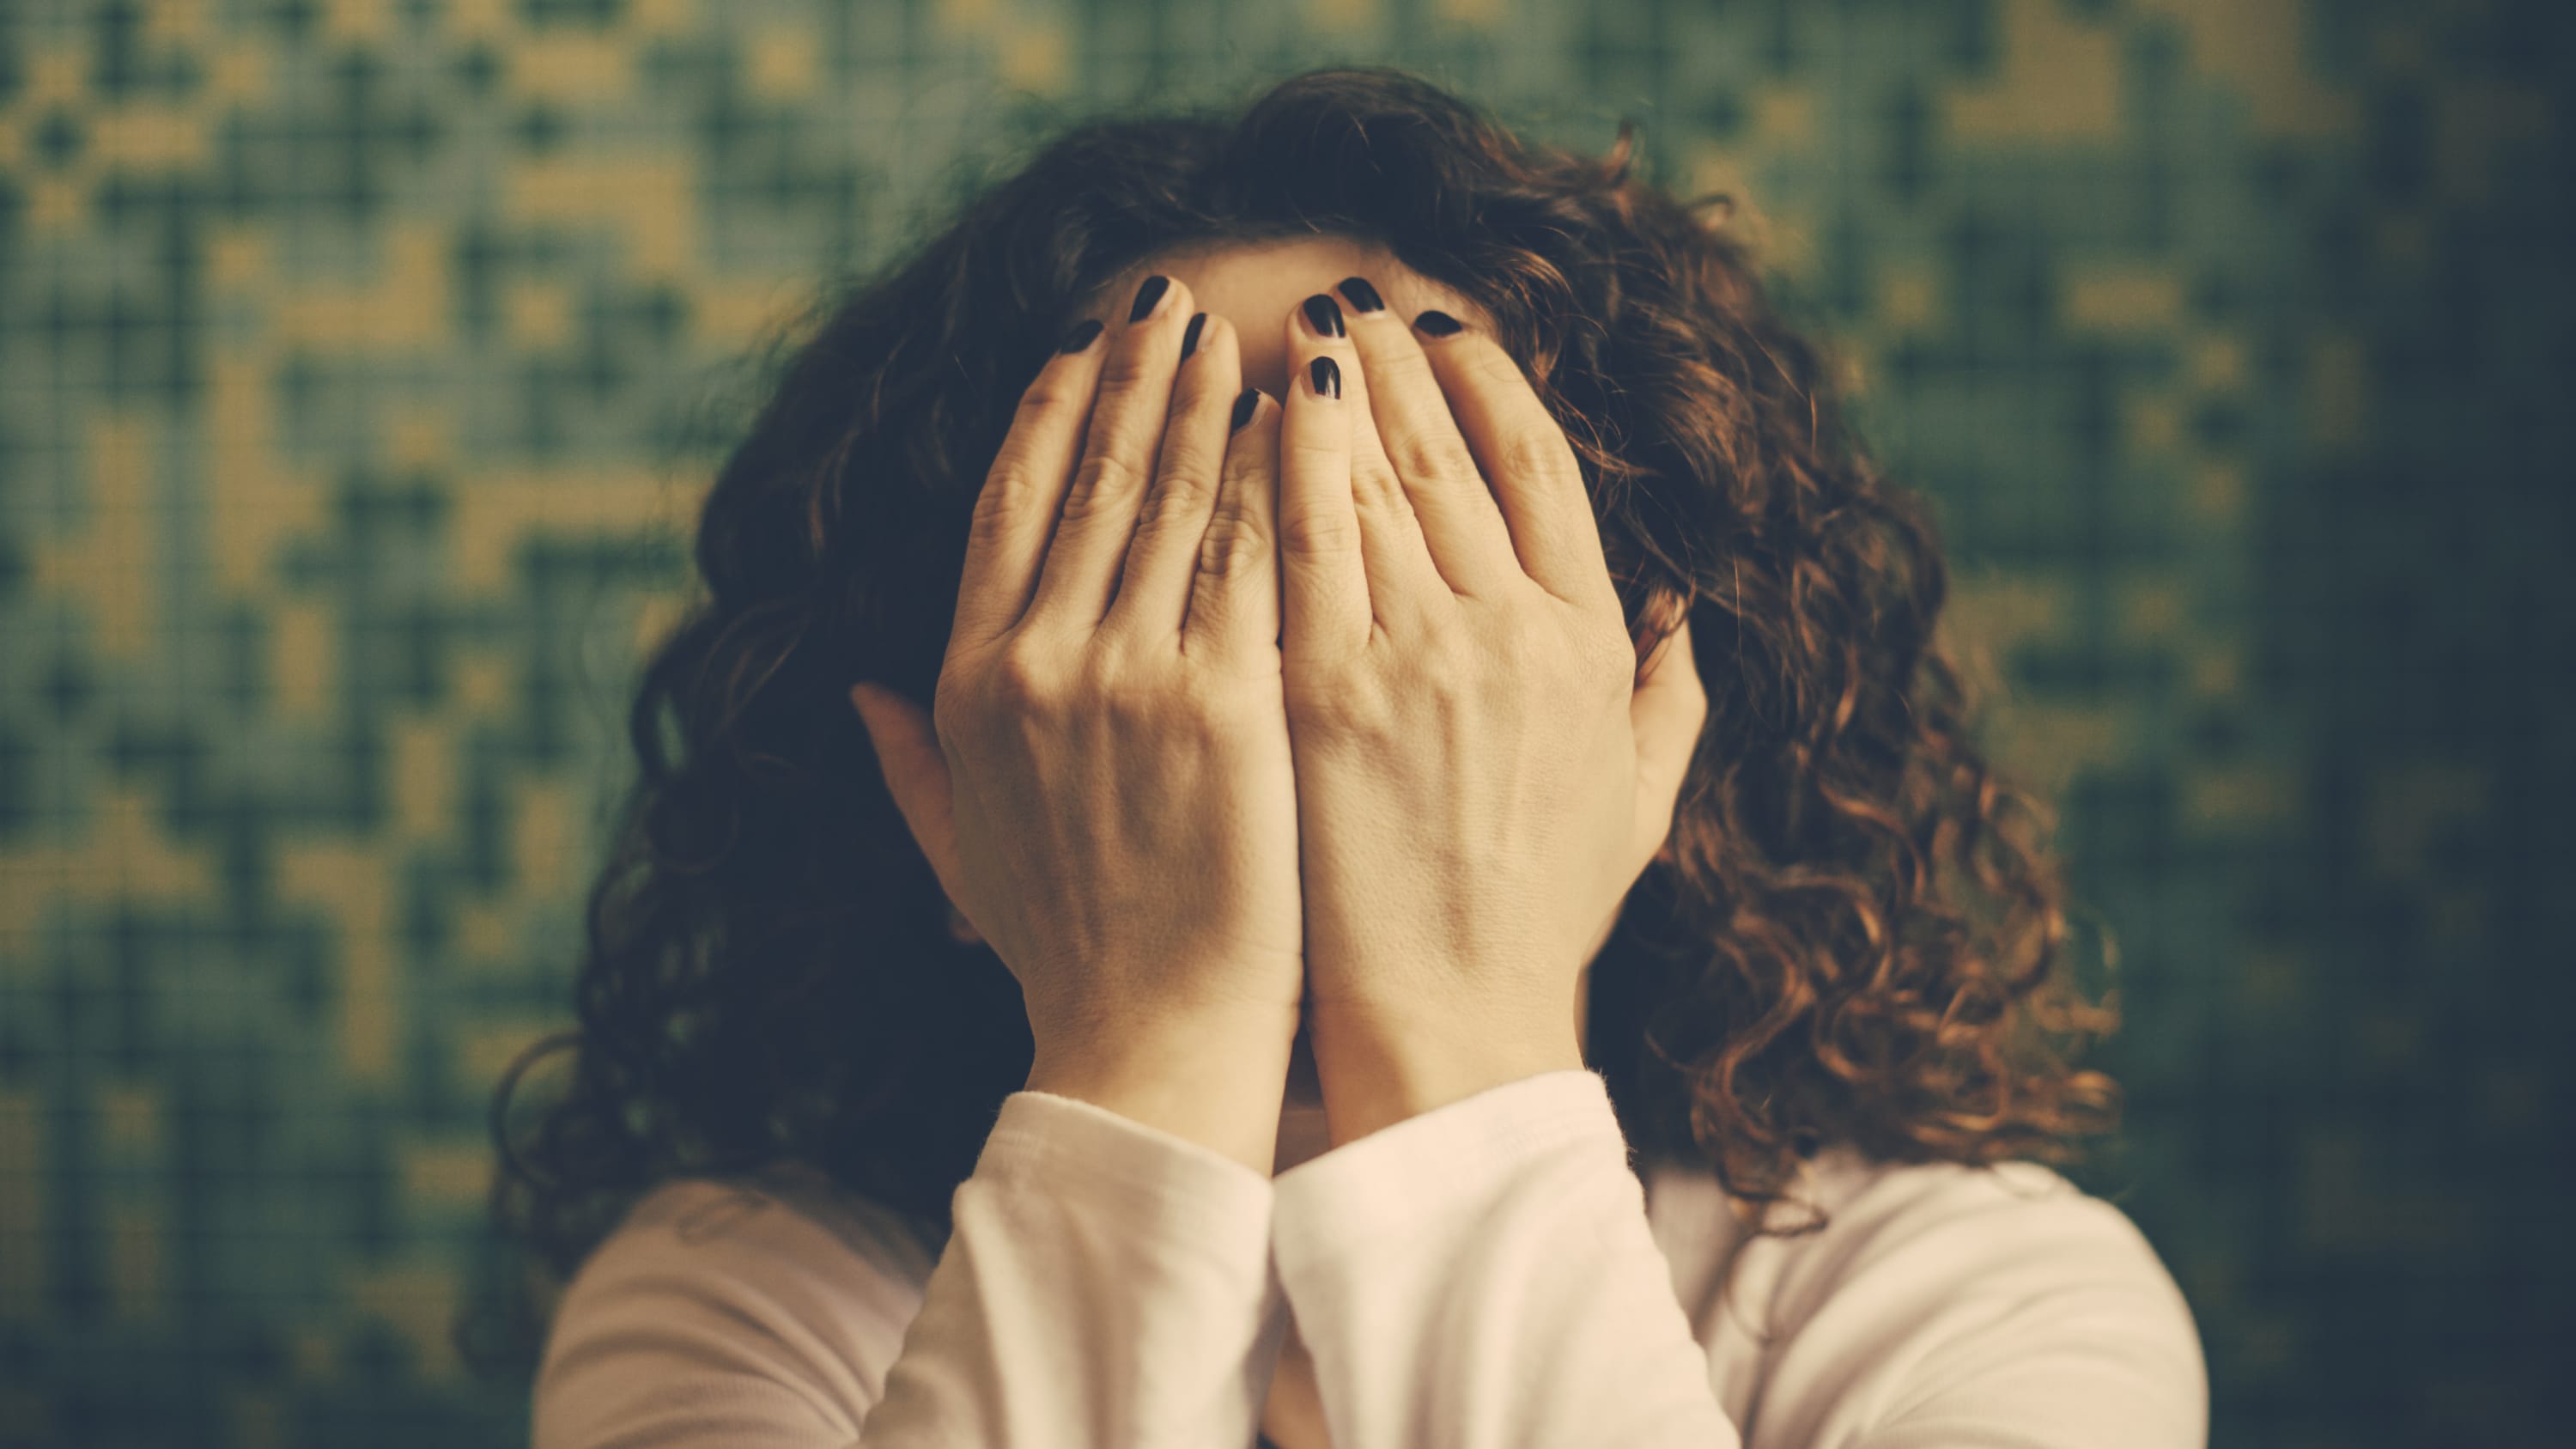 woman with hands over face, embarrassed about common gastrointestinal issues